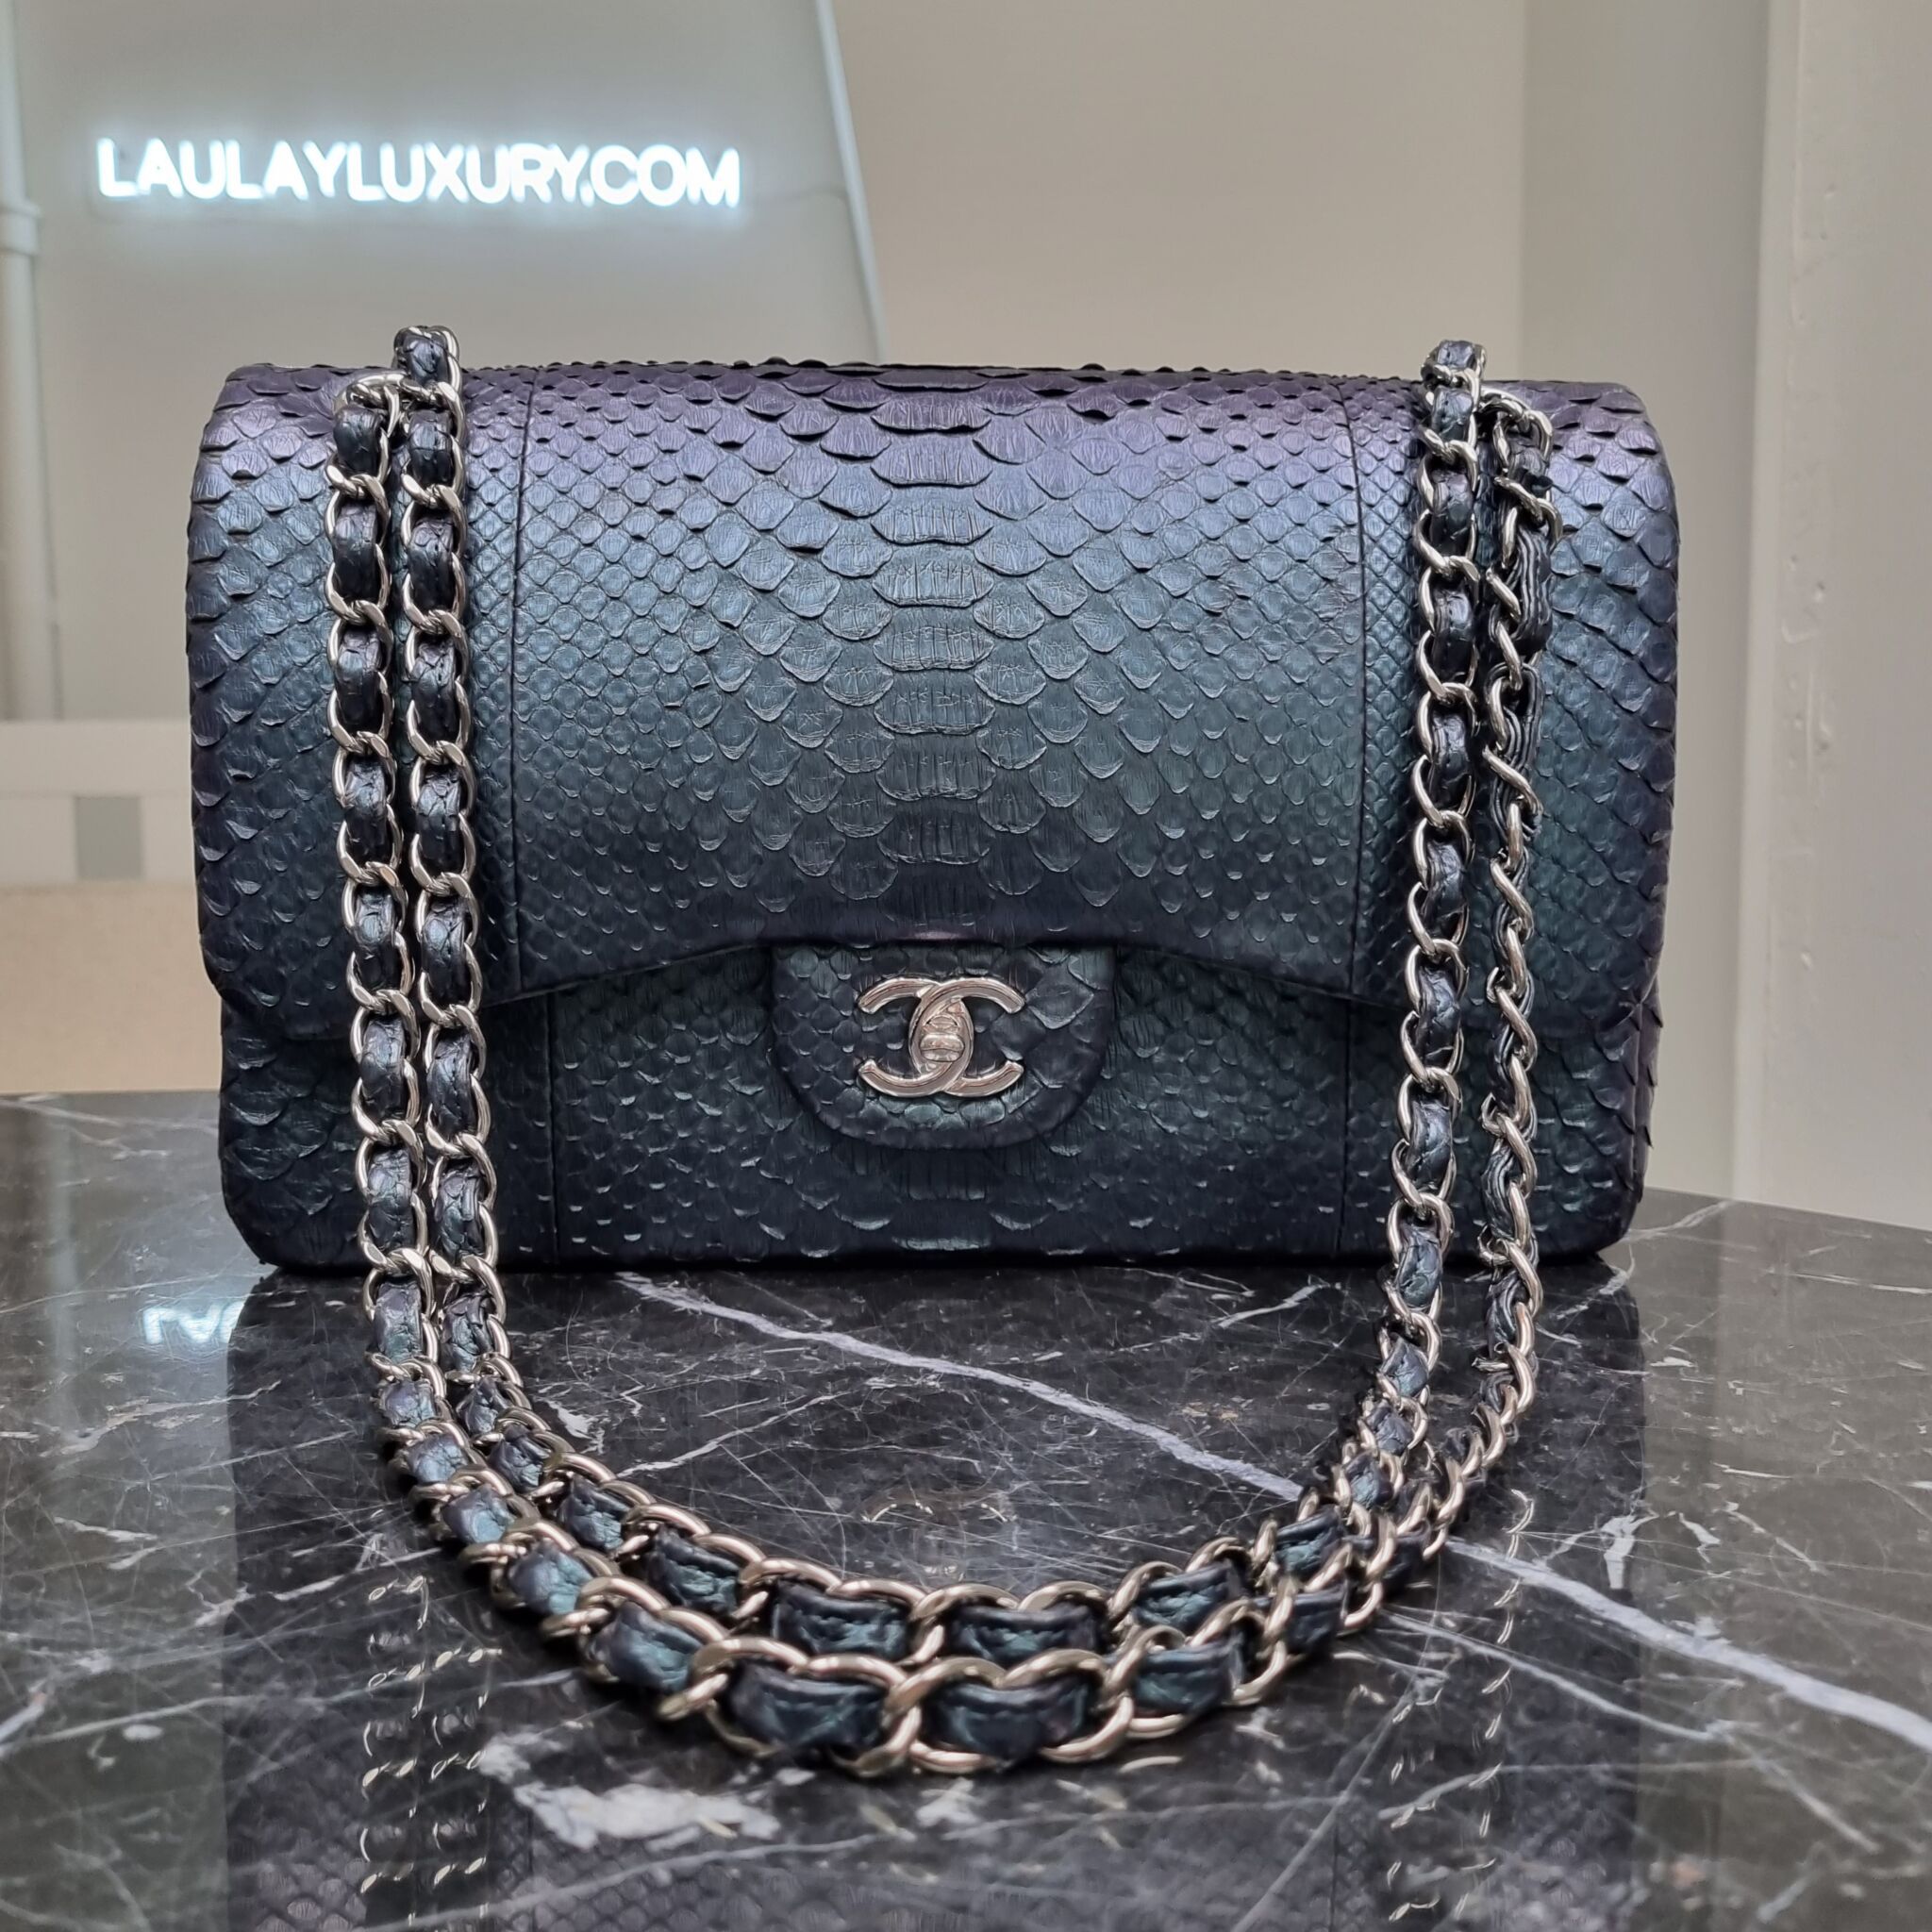 How to Buy and Preserve Chanel Handbags  Invaluable